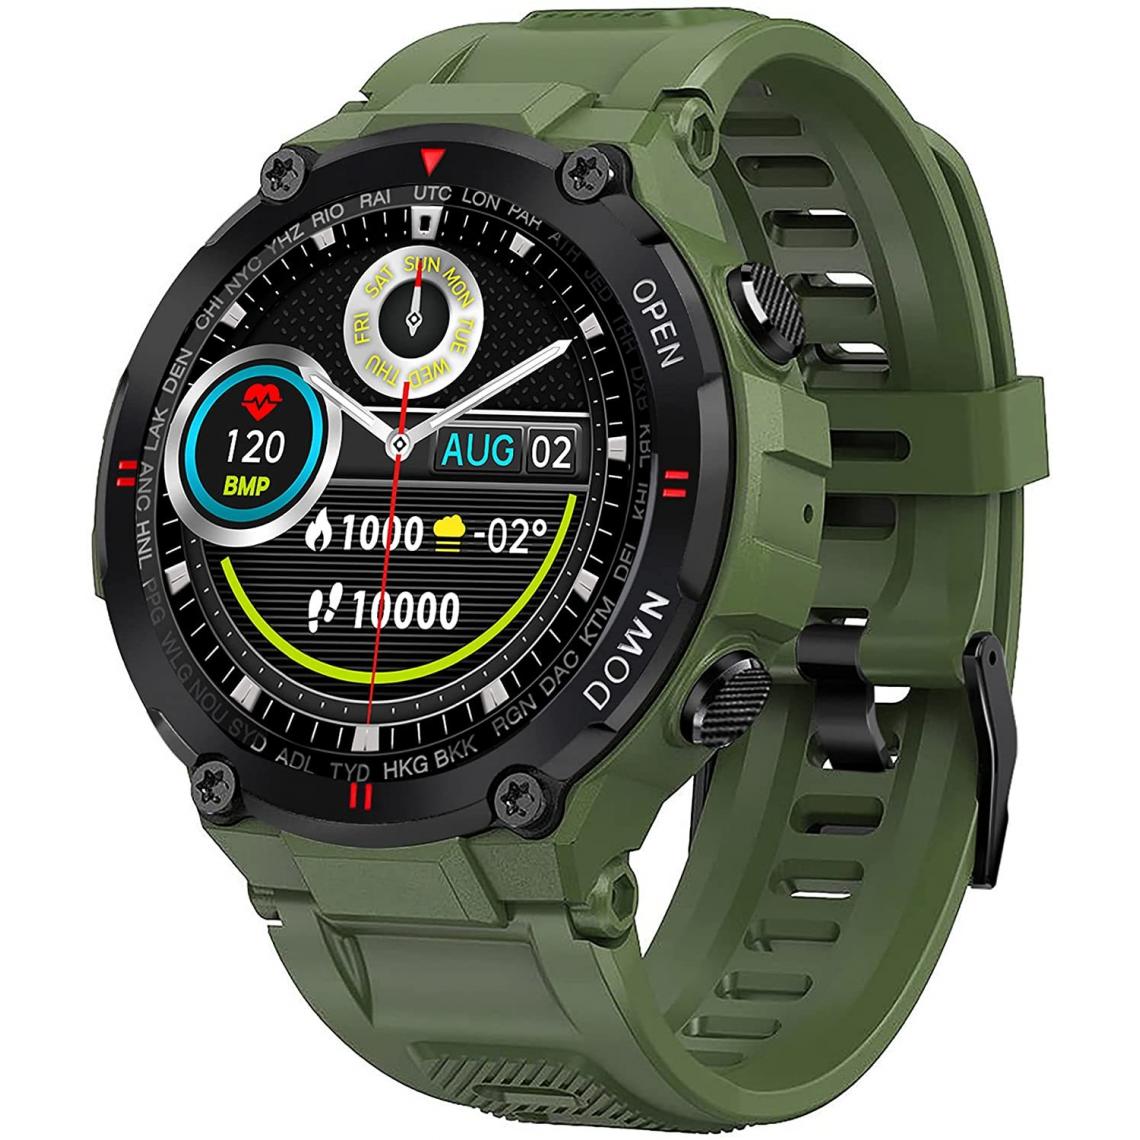 Chronotech Montres - Chronus Smart Watch for Men, 5 ATM Waterproof Military Tactical Sports Watch Sports Watch with Step Counter Fitness Tracker (Green) - Montre connectée